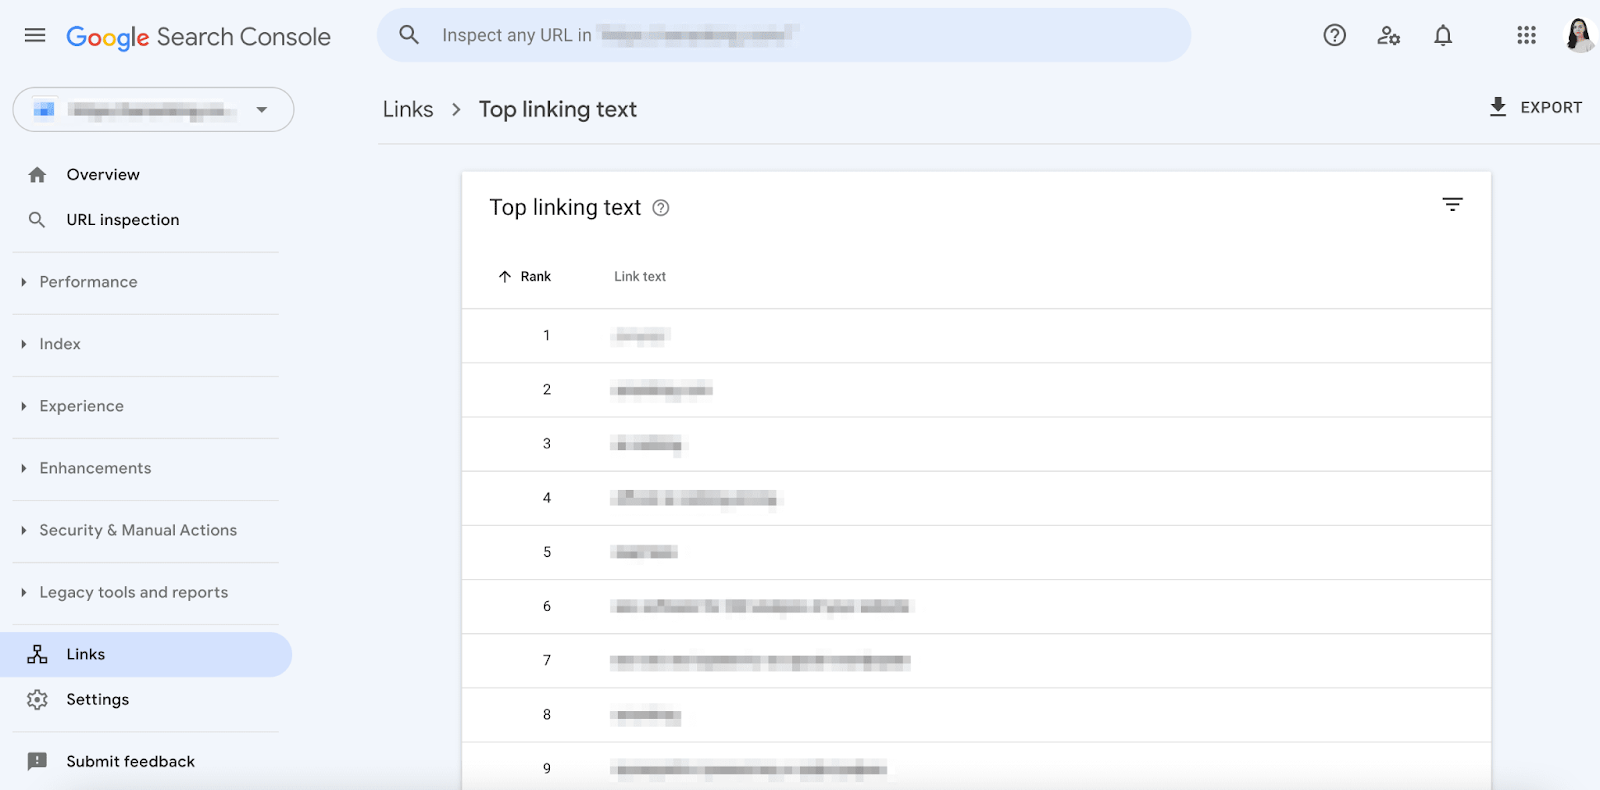 Top linking text - Google Search Console